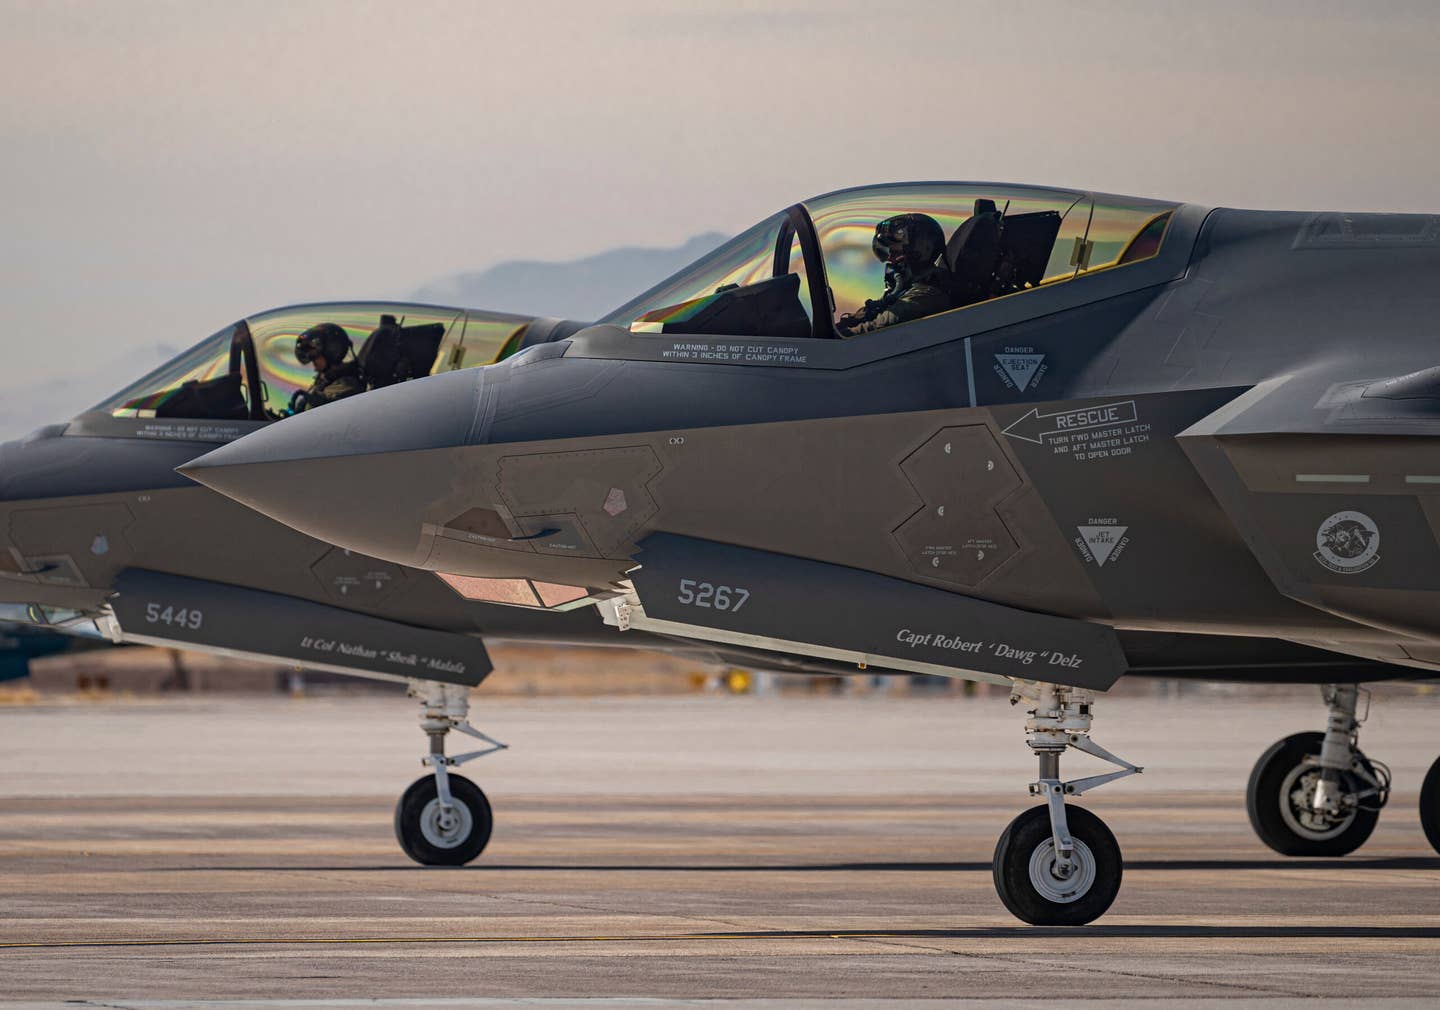 Two F-35A Lightning II fighter jets assigned to the 422nd Test and Evaluation Squadron (TES), wait to take off for a mission at Nellis Air Force Base, Nevada, Oct. 21, 2021. The 422nd TES is a geographically separated unit of the 53rd Test and Evaluation Group, Eglin AFB, Florida. (U.S. Air Force photo by William R. Lewis)